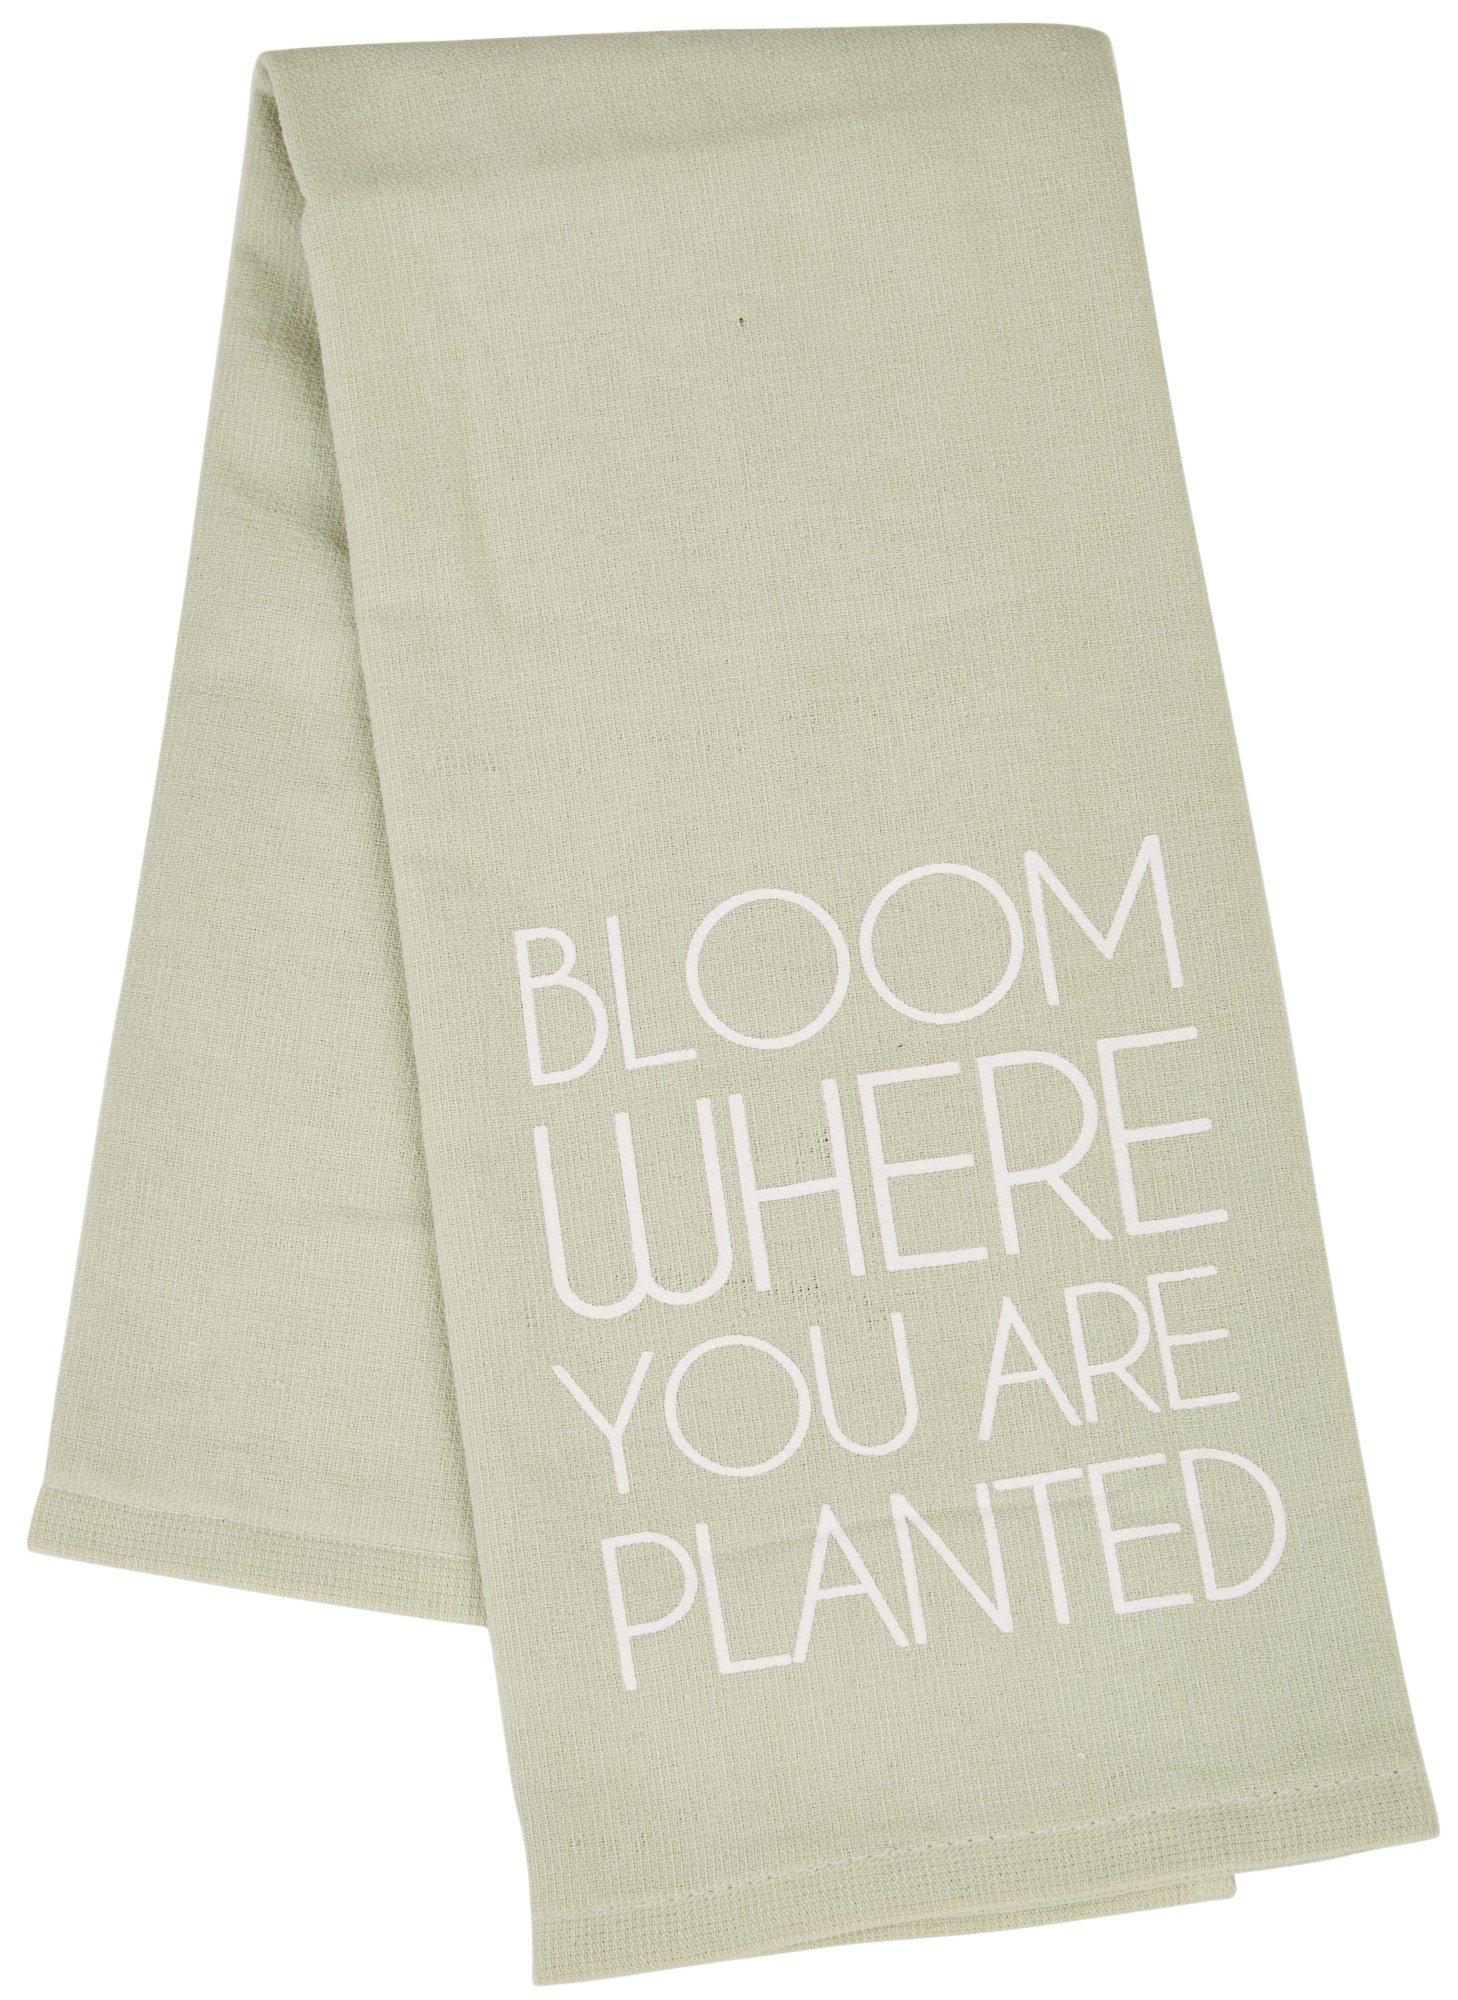 Ritz 16x26 Bloom Where You Are Planted Kitchen Towel